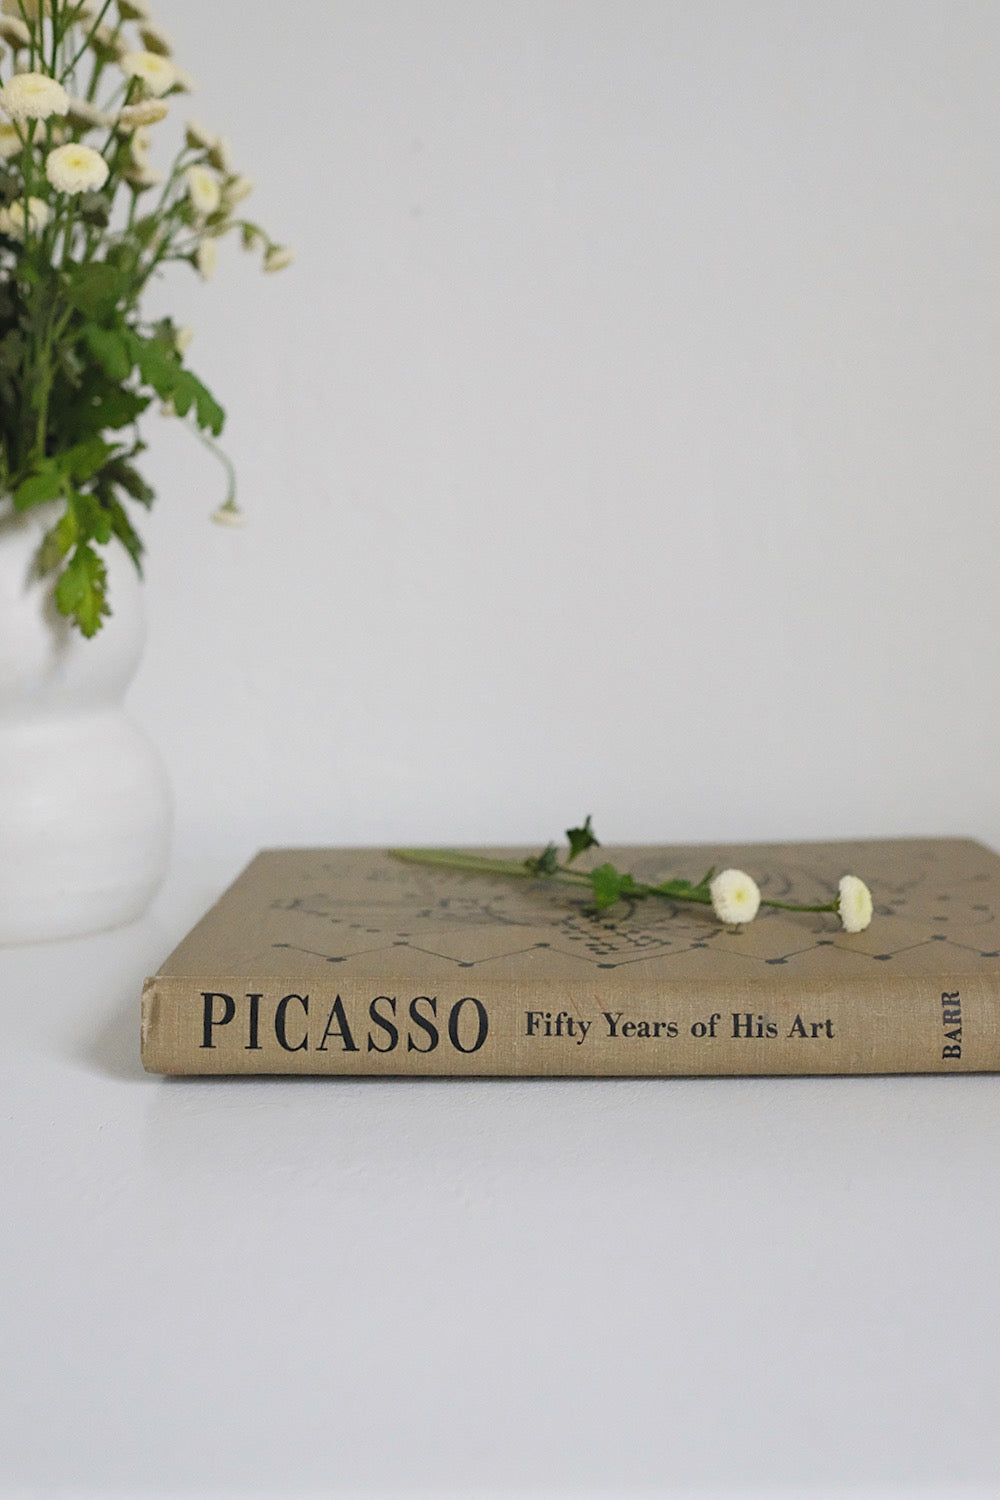 "picasso: fifty years of his art"